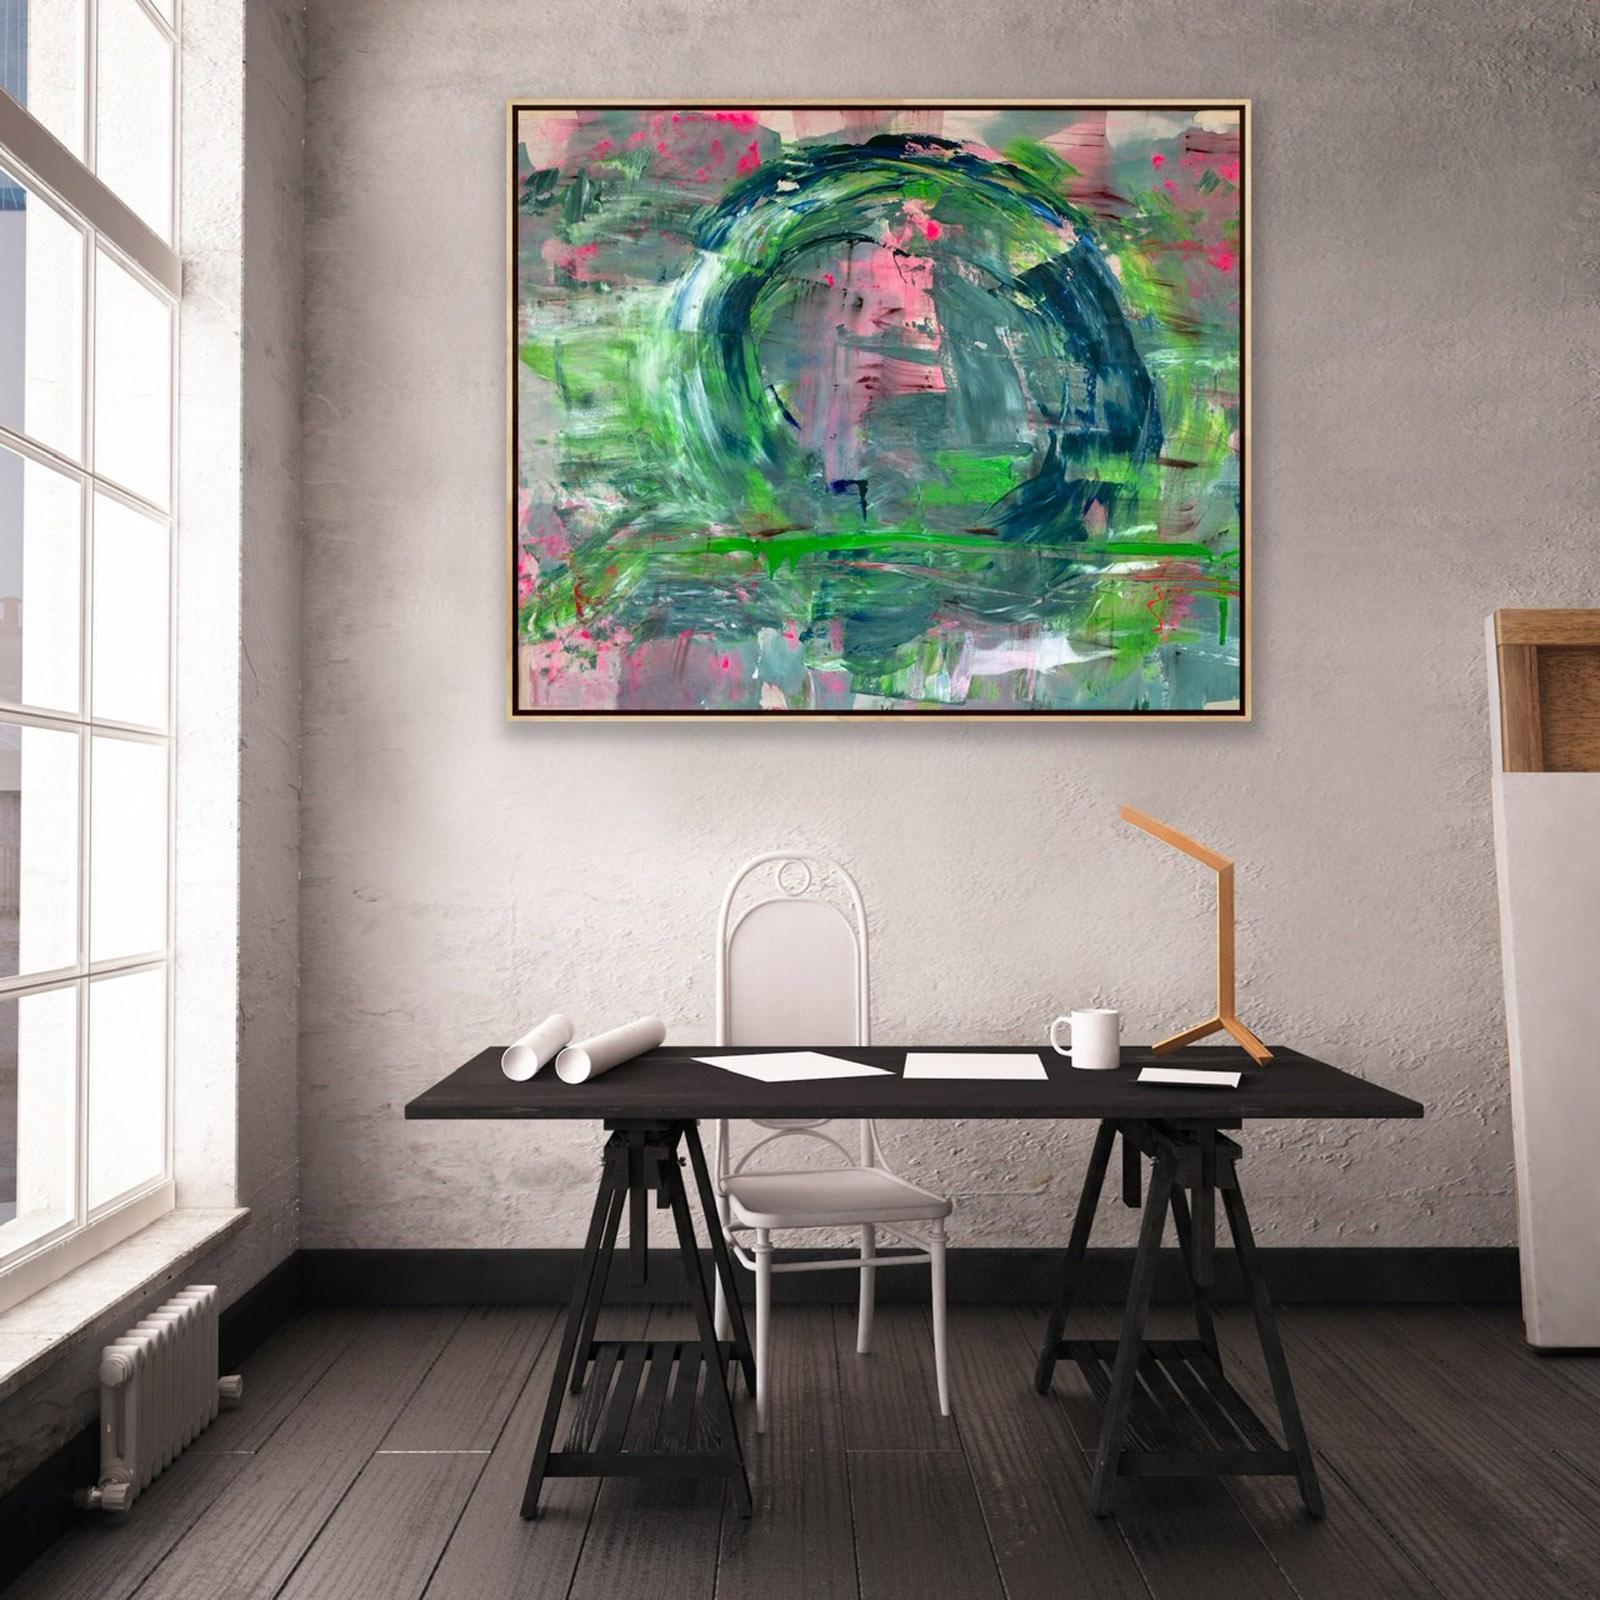 Spring Into Action - Gray Abstract Painting by Francine Tint